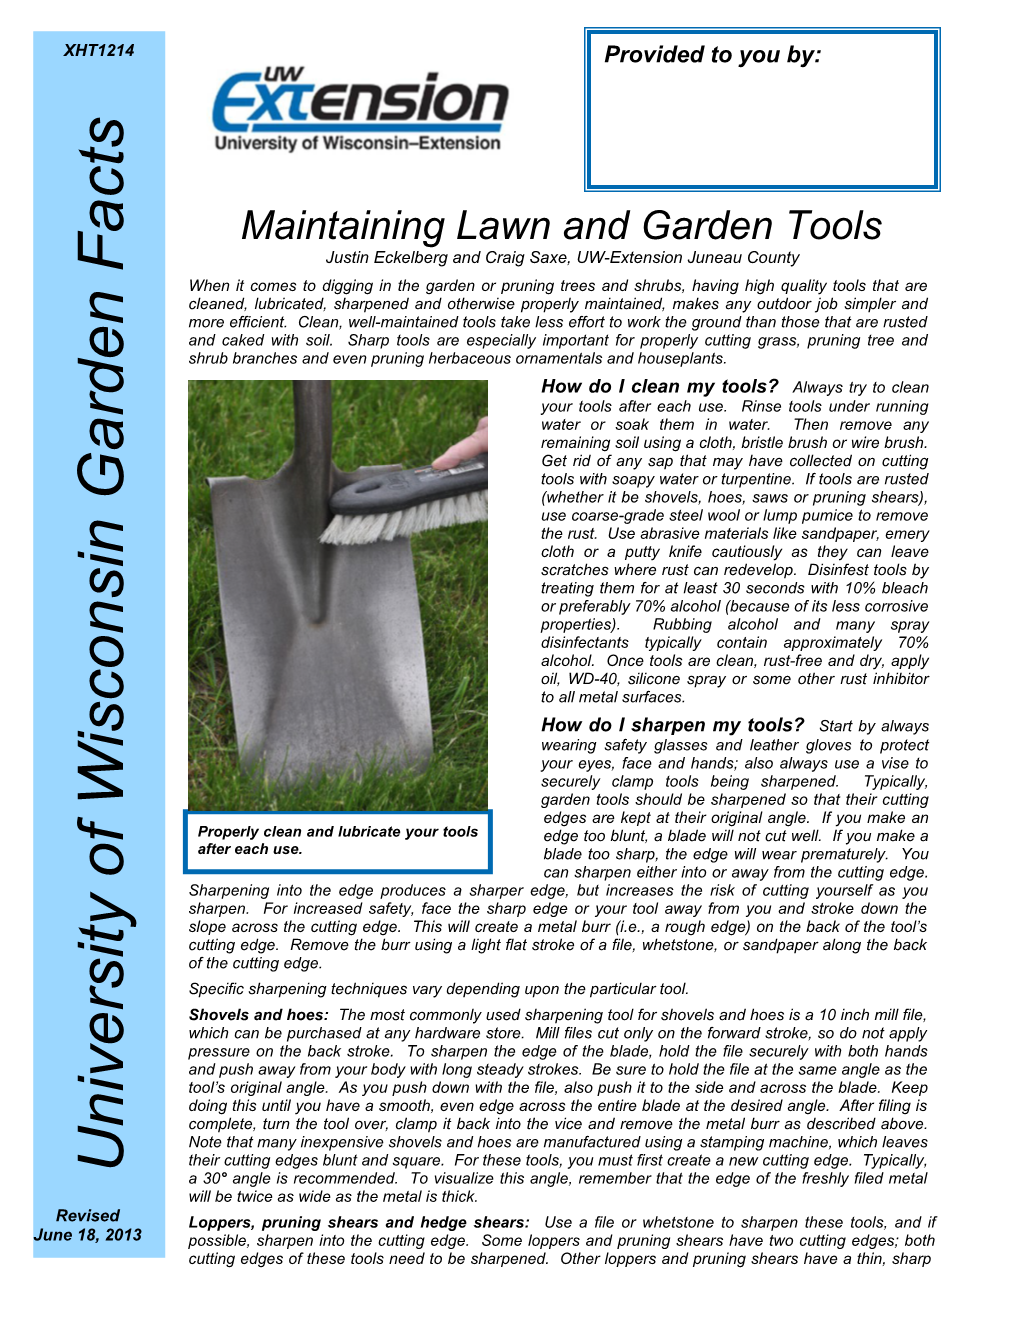 Maintaining Lawn and Garden Tools